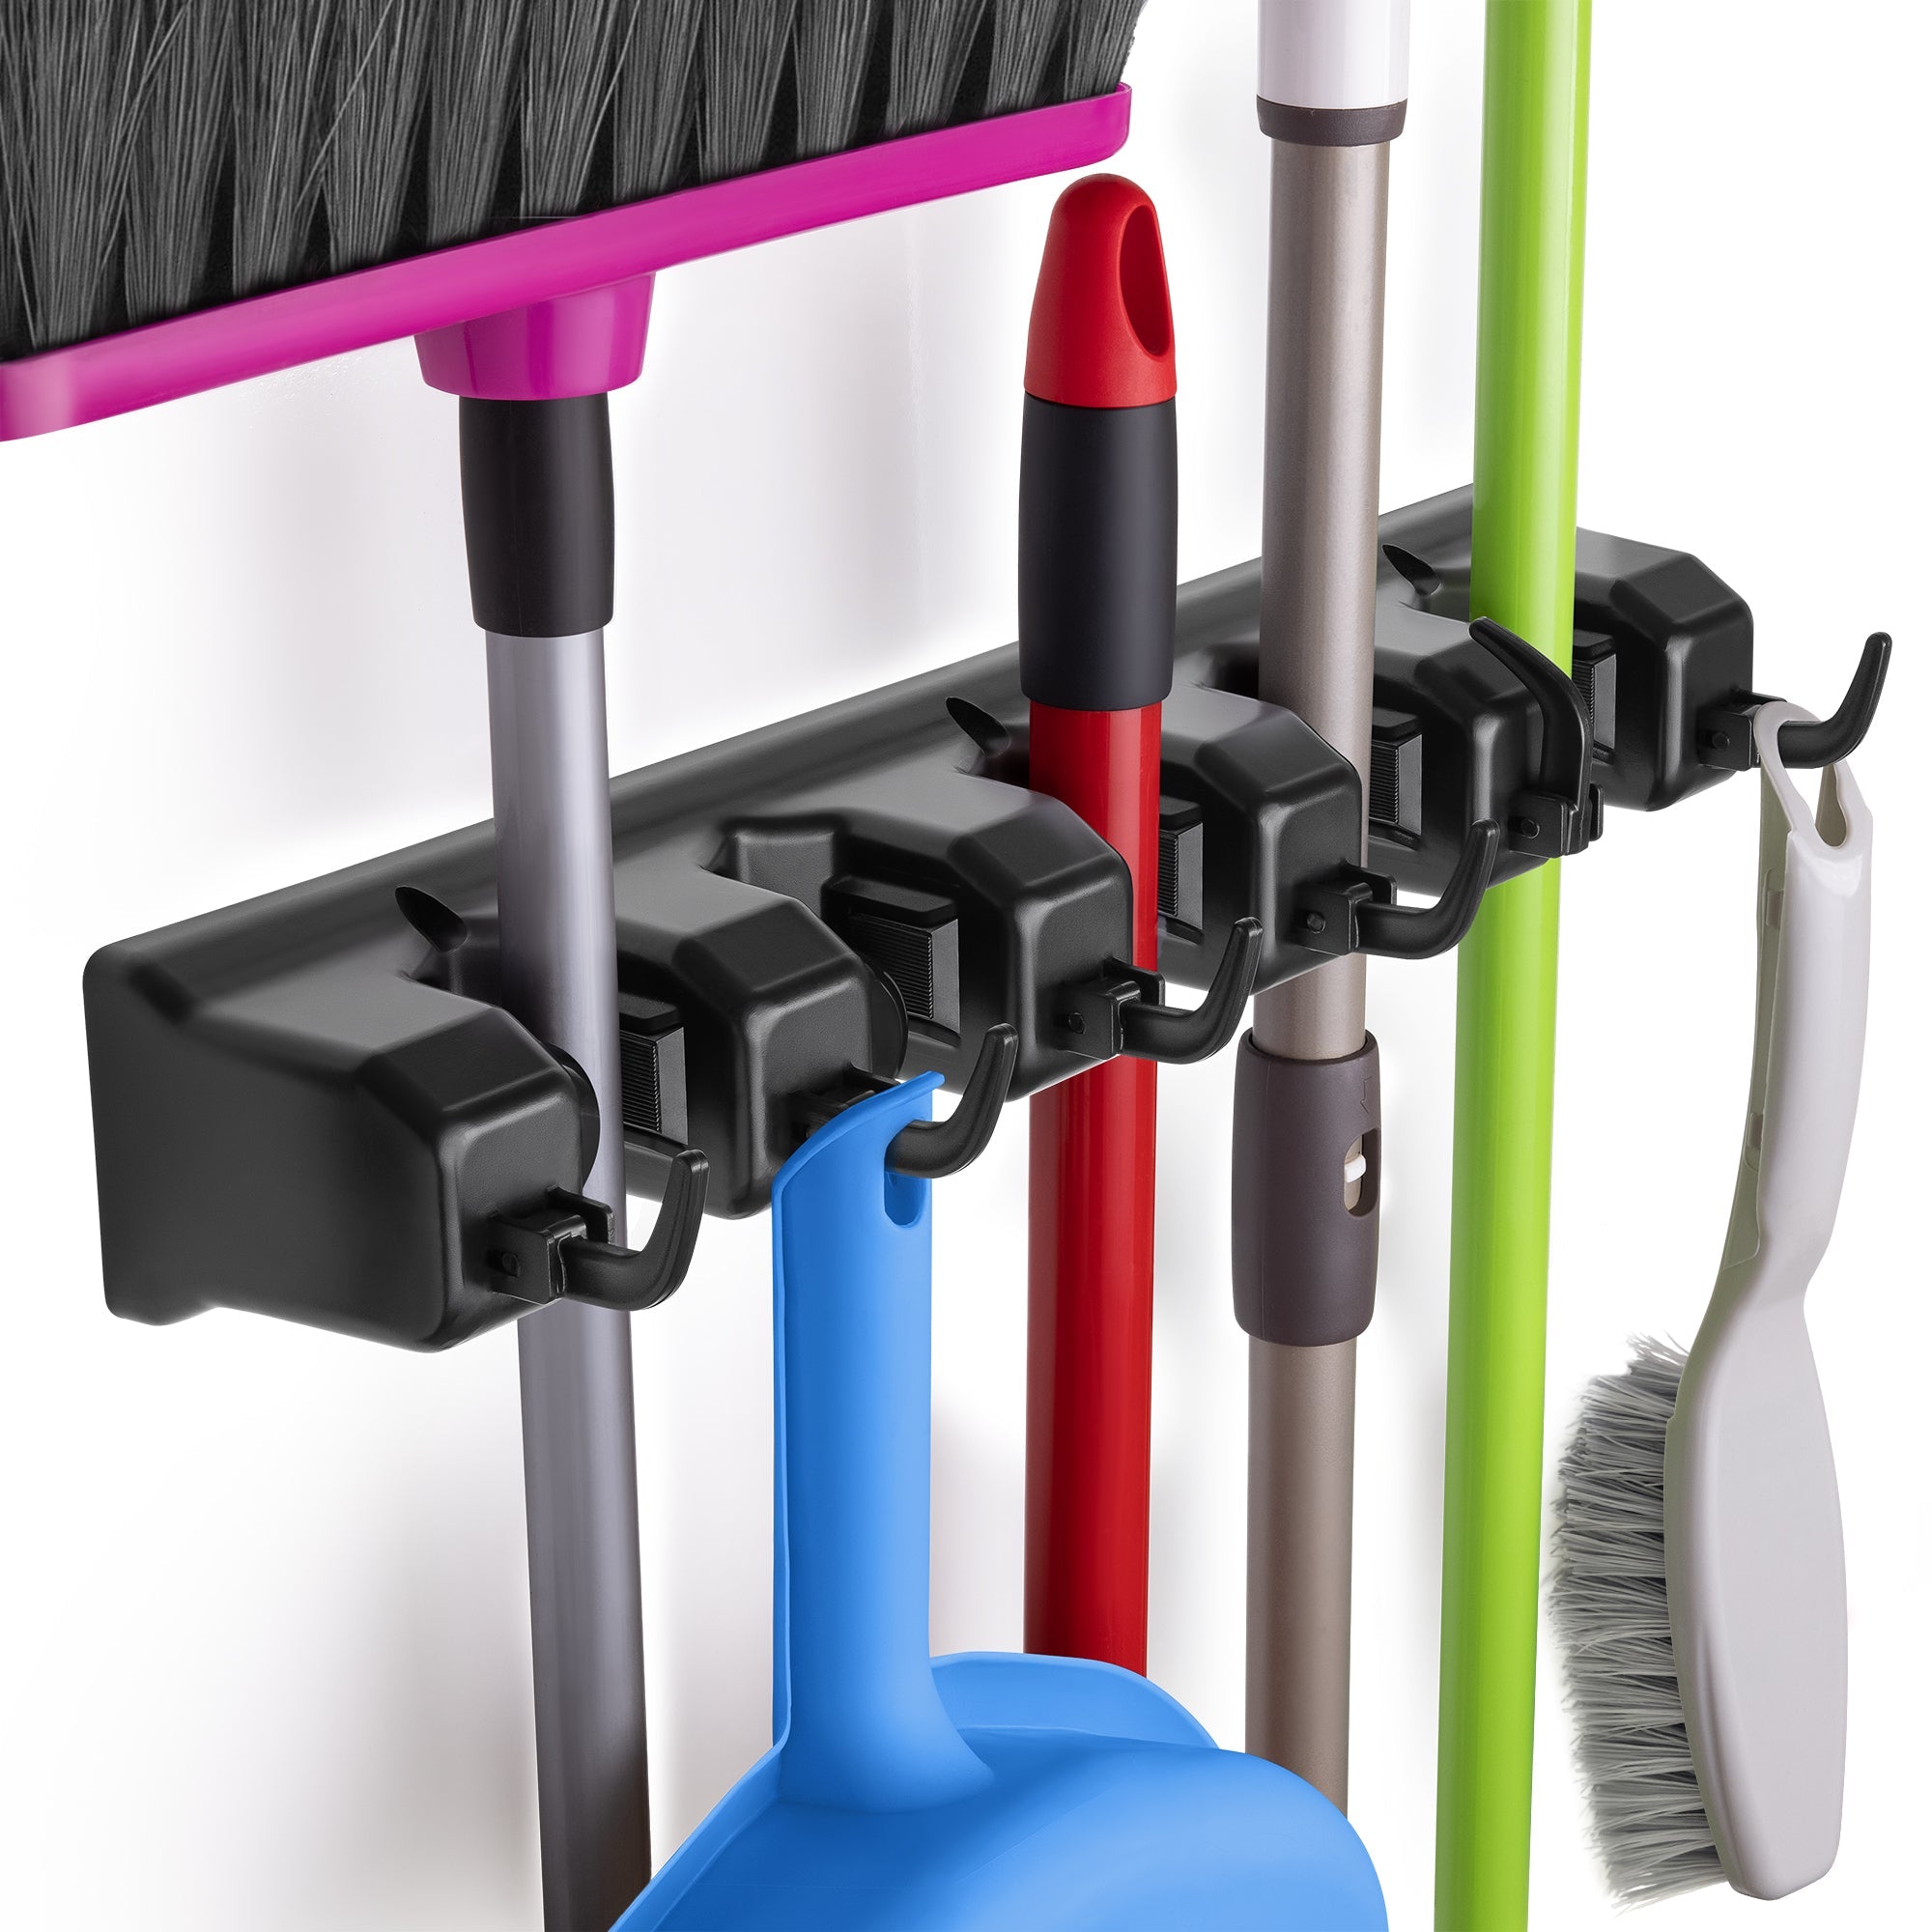 https://www.zulaykitchen.com/cdn/shop/products/zulay-home-mop-and-broom-organizer-wall-mountzulay-home-mop-and-broom-organizer-wall-mountzulay-kitchenzulay-kitchenzh-mb-rgnzr-pl-5sltblk-160516.jpg?v=1701864974